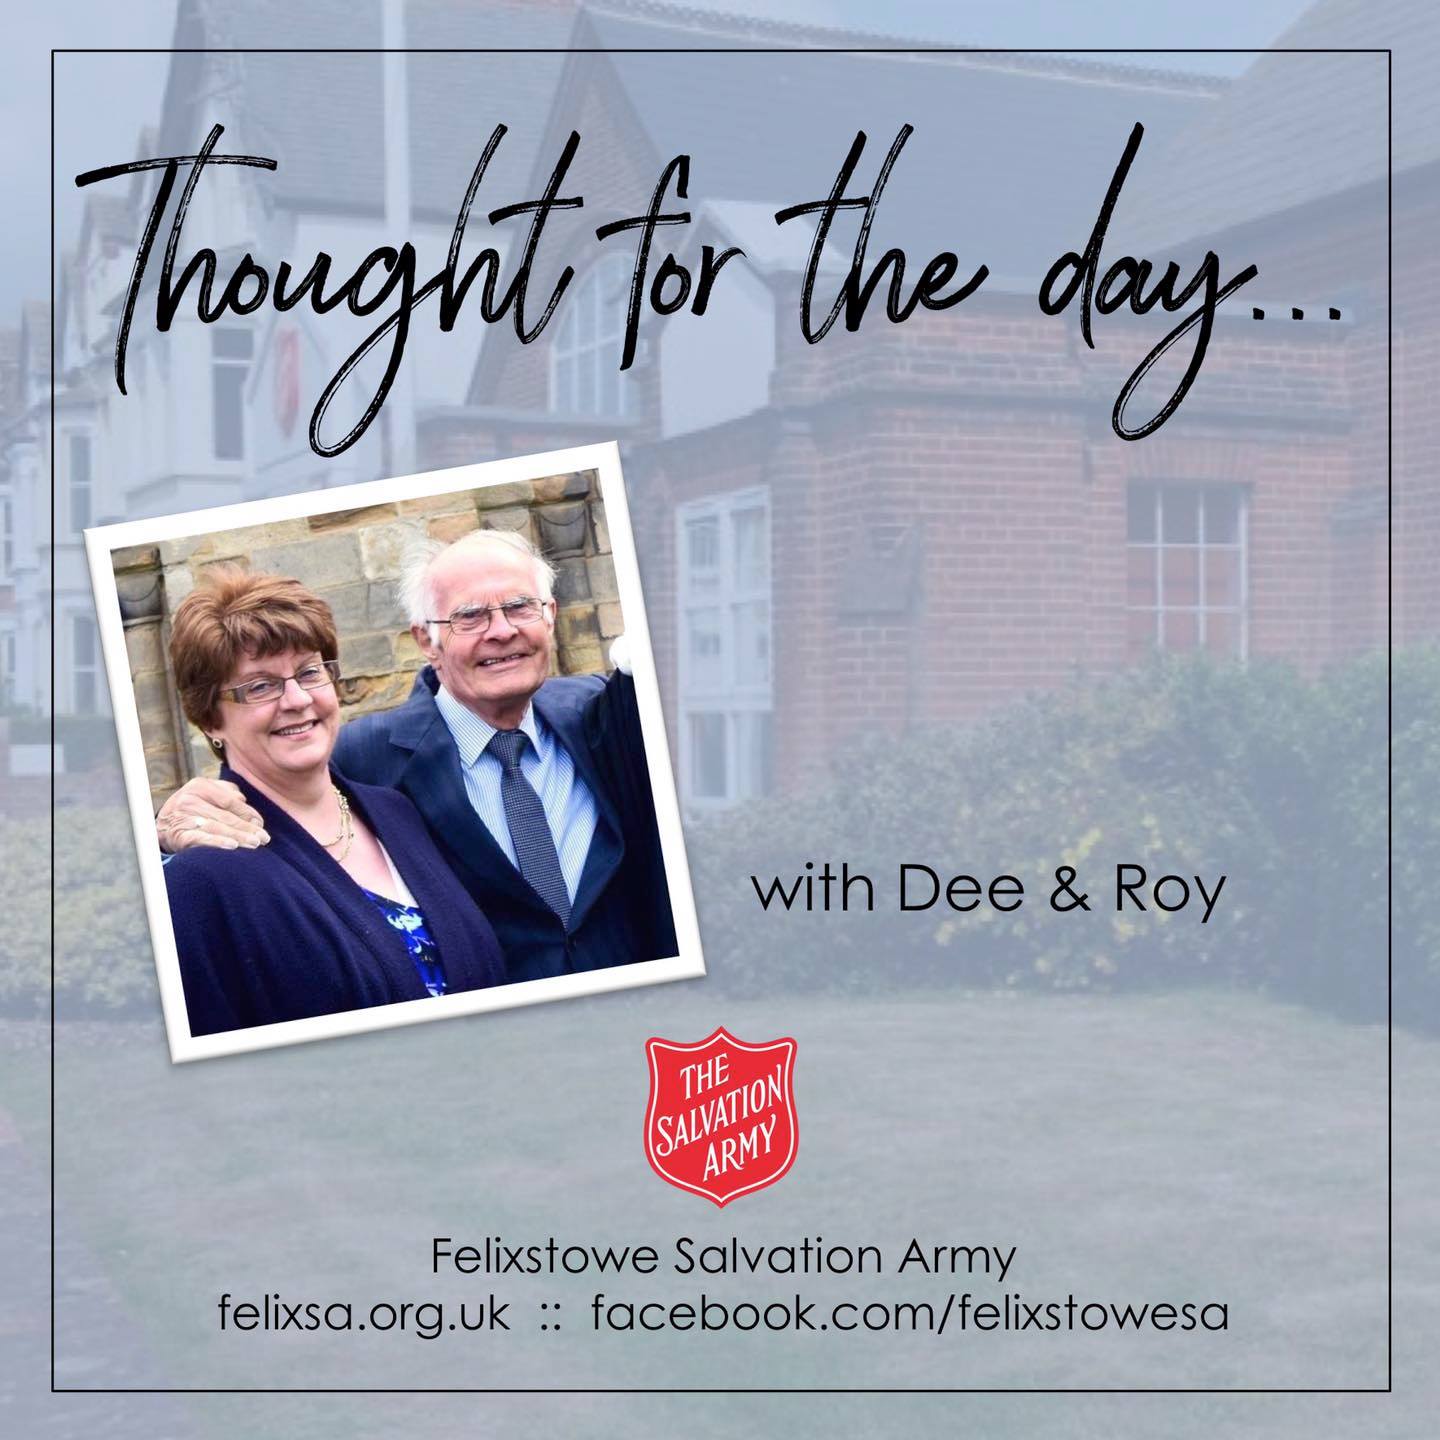 Thought for the Day with Dee and Roy